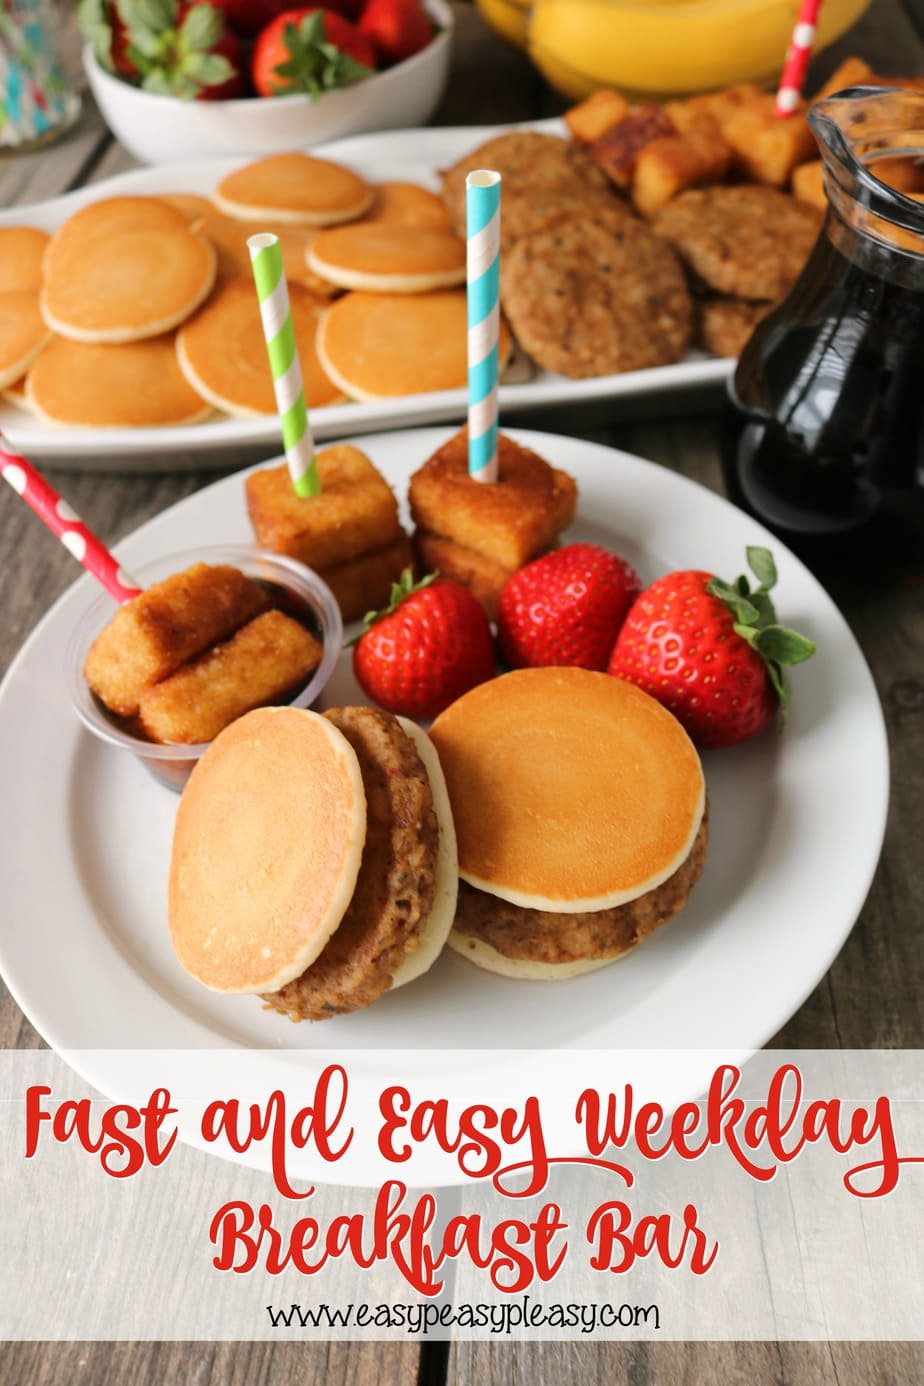 Create a fast and easy weekday breakfast bar your kids will love with this easy weekday breakfast idea from easypeasypleasy.com